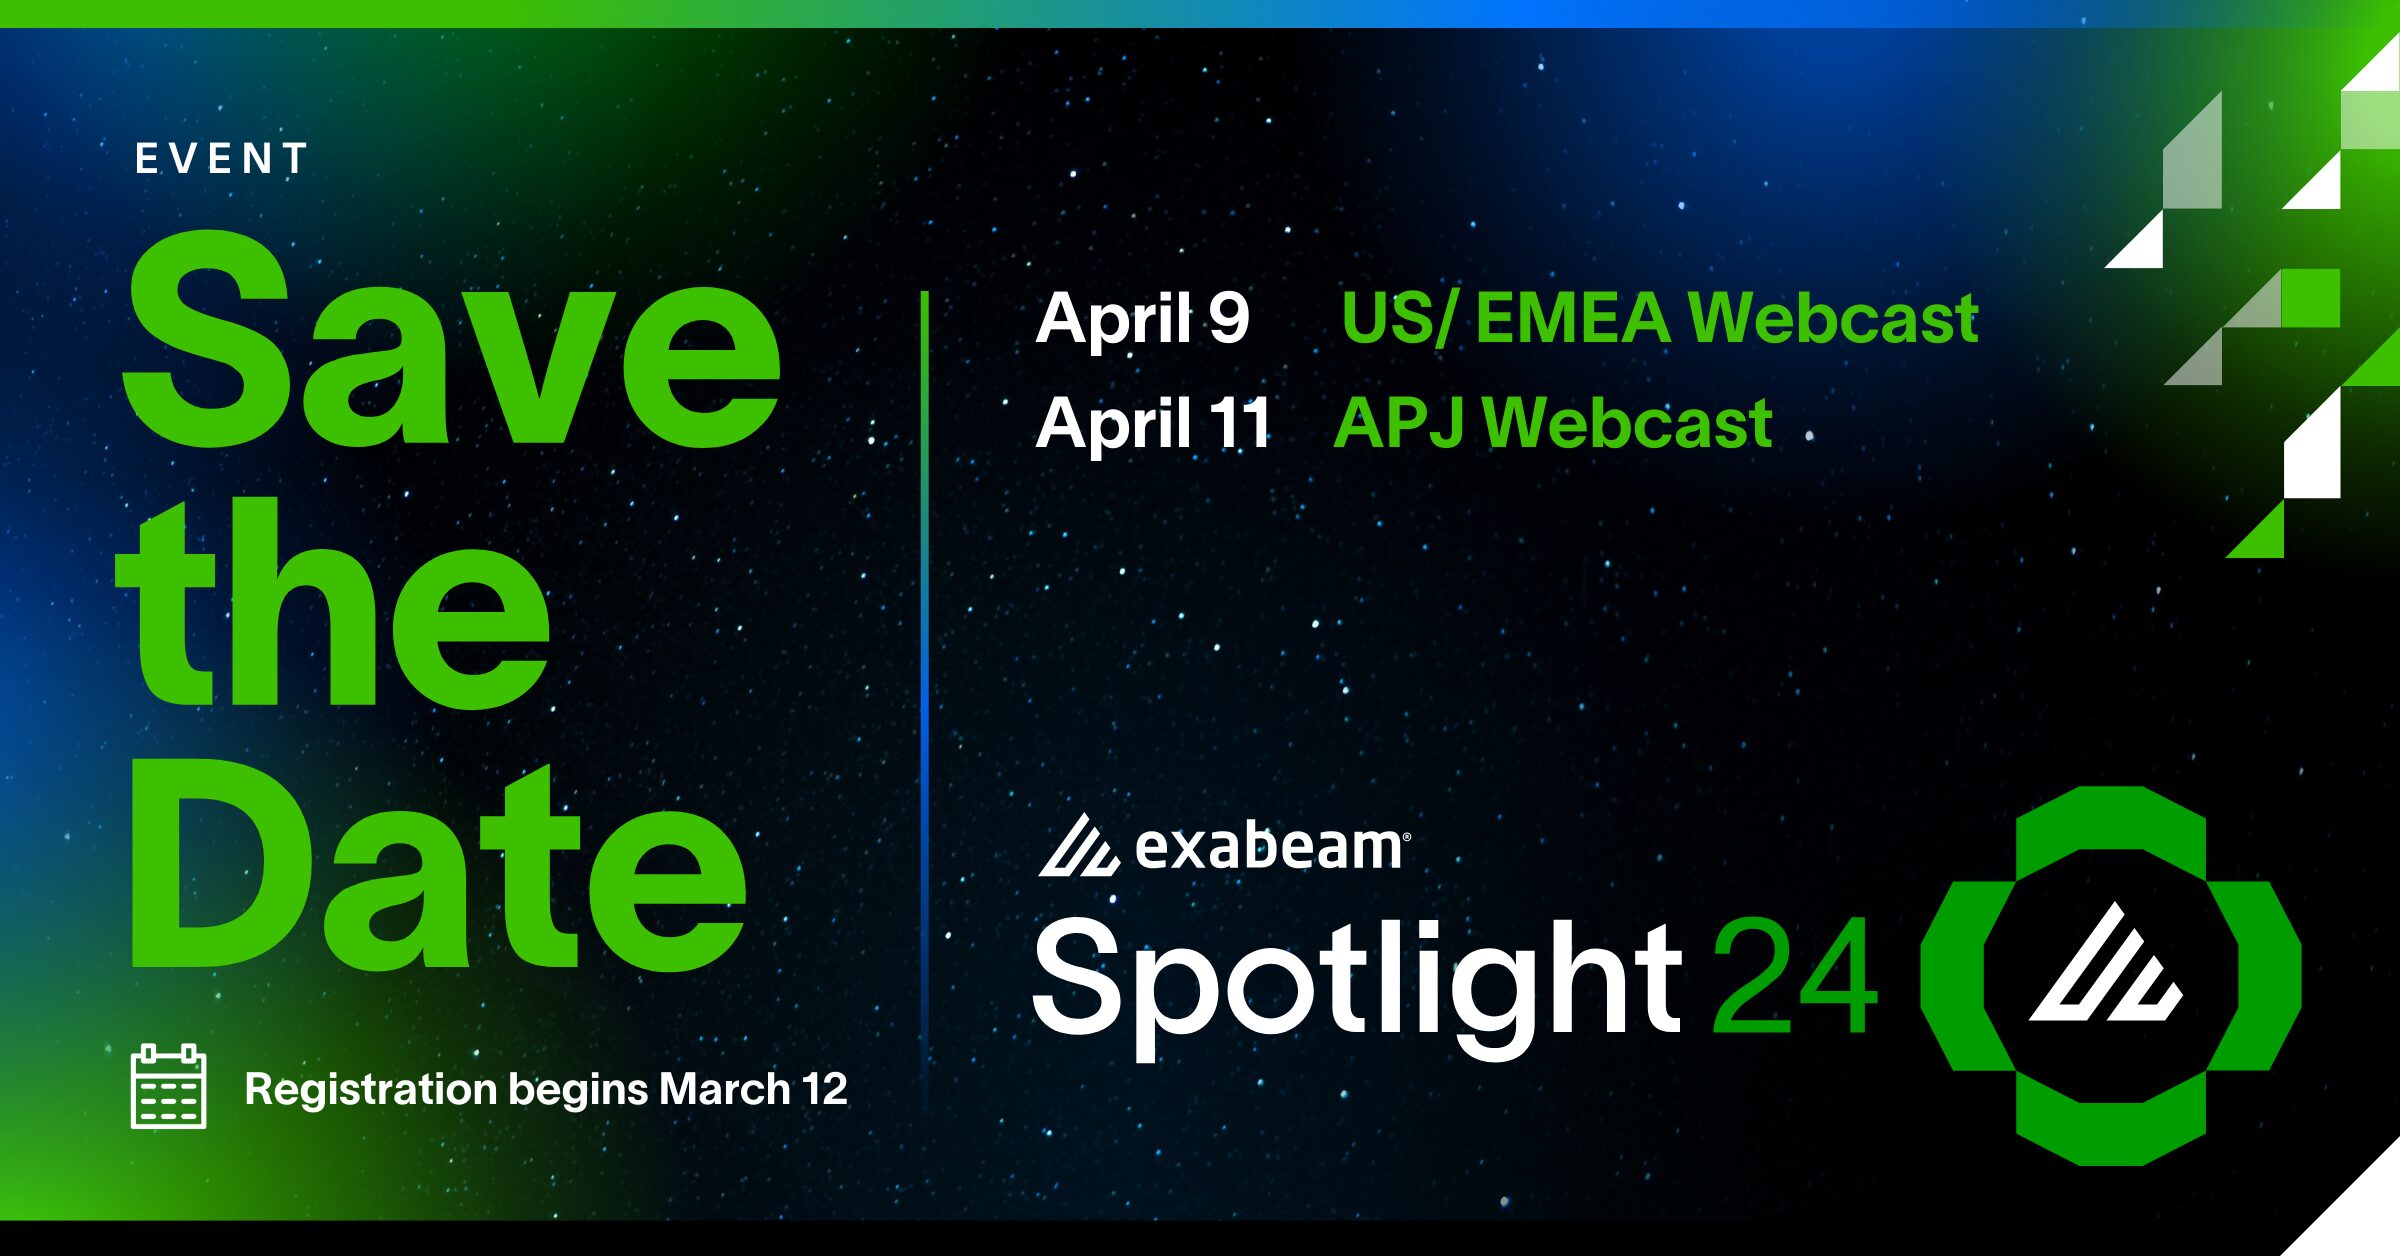 Save The Date! Exabeam Spotlight24 Global Webcast Registration Opens March 12